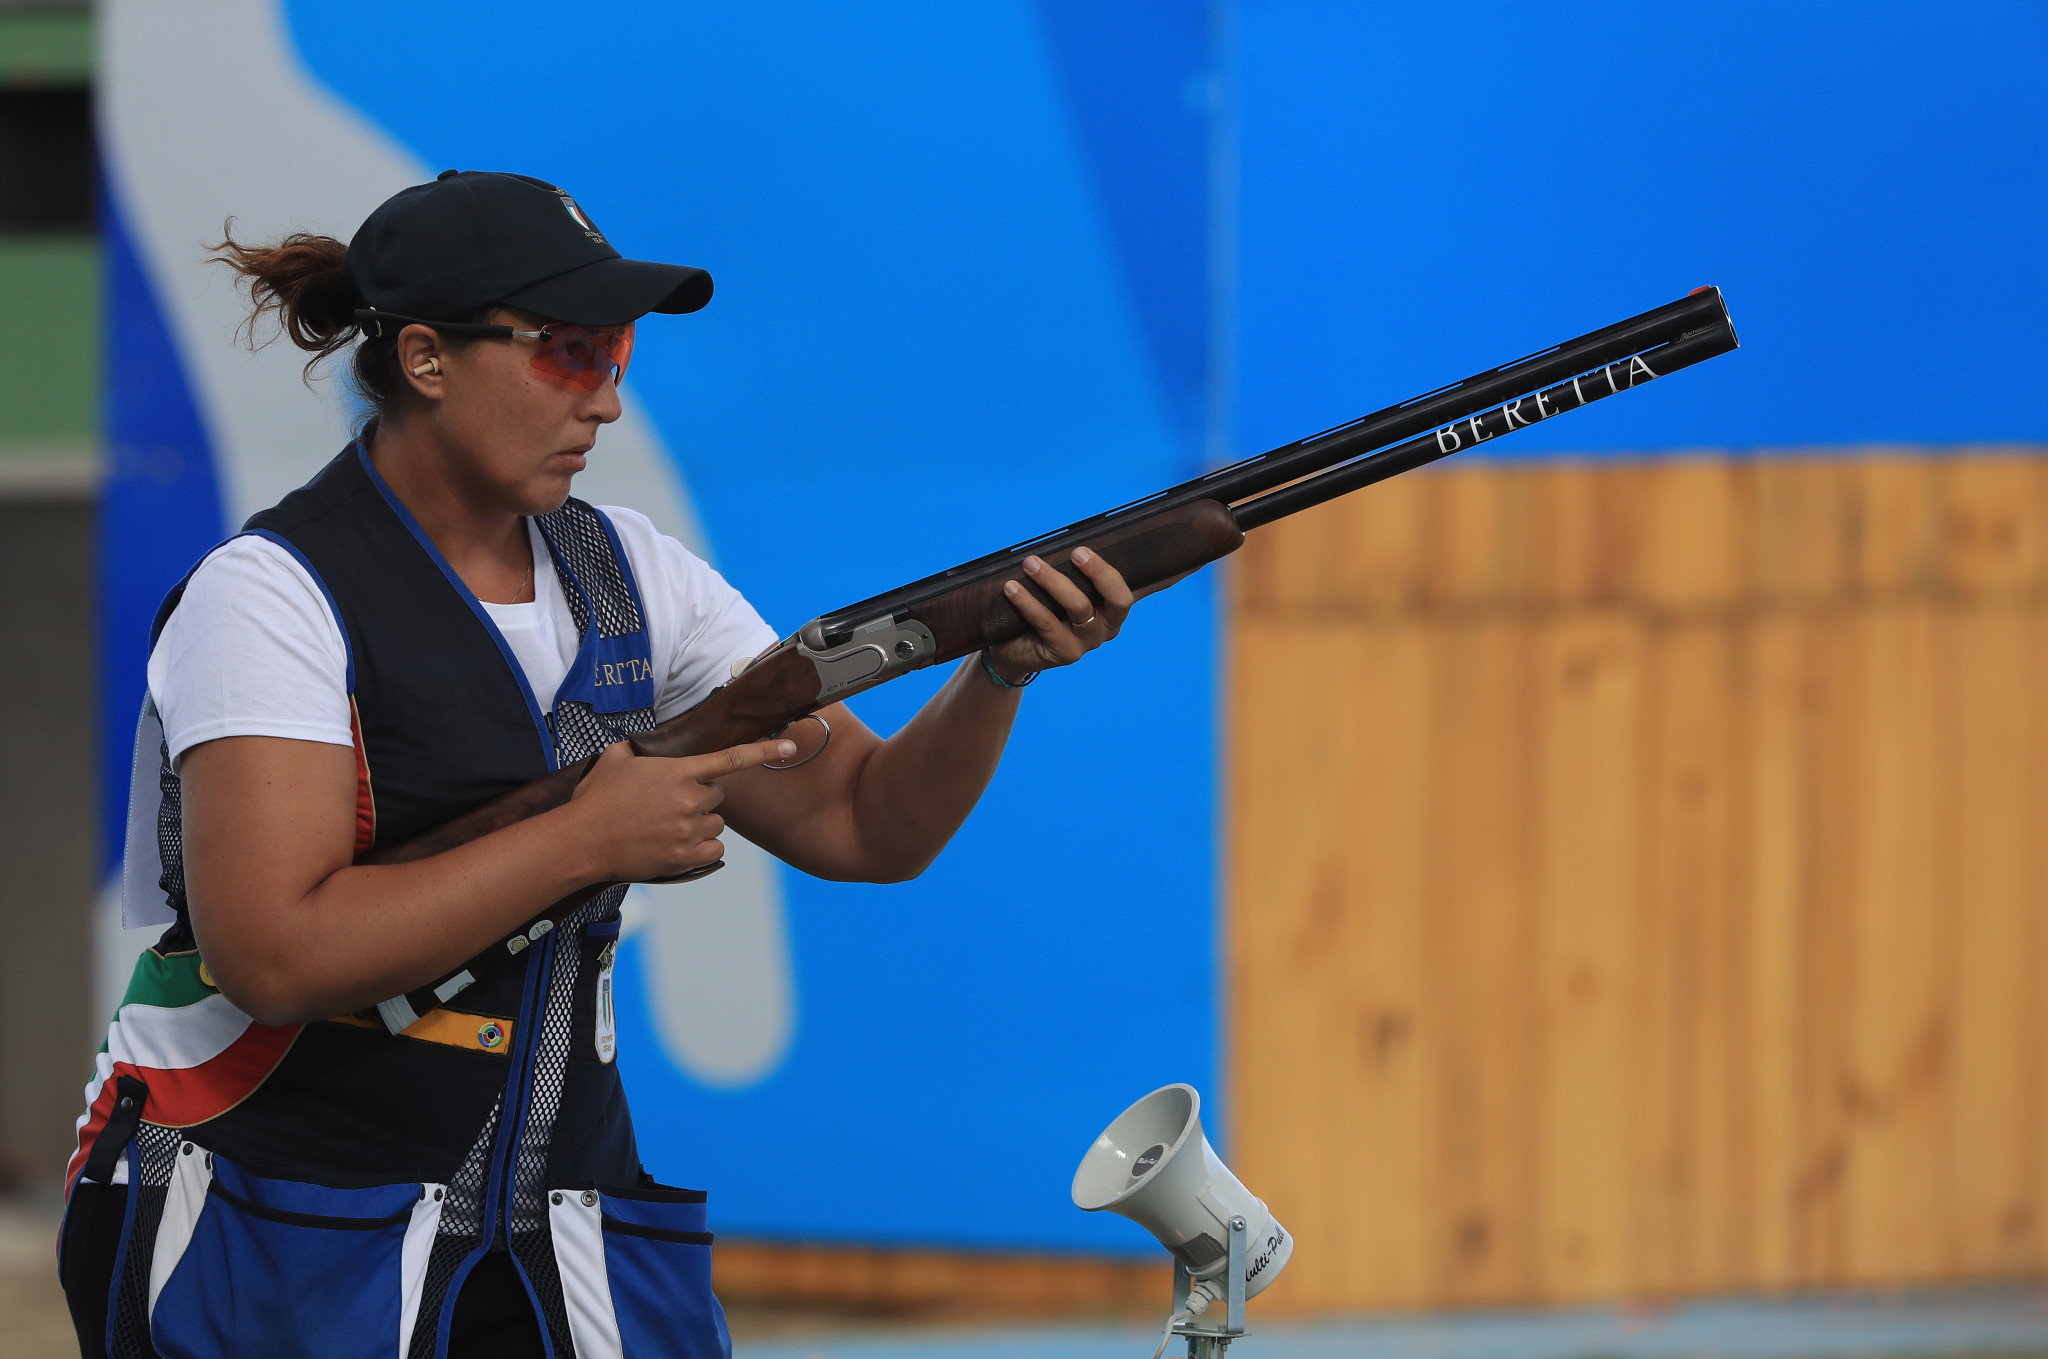 Italy's Olympic champion Diana Bacosi won the women's skeet gold medal in Lonato ©Getty Images